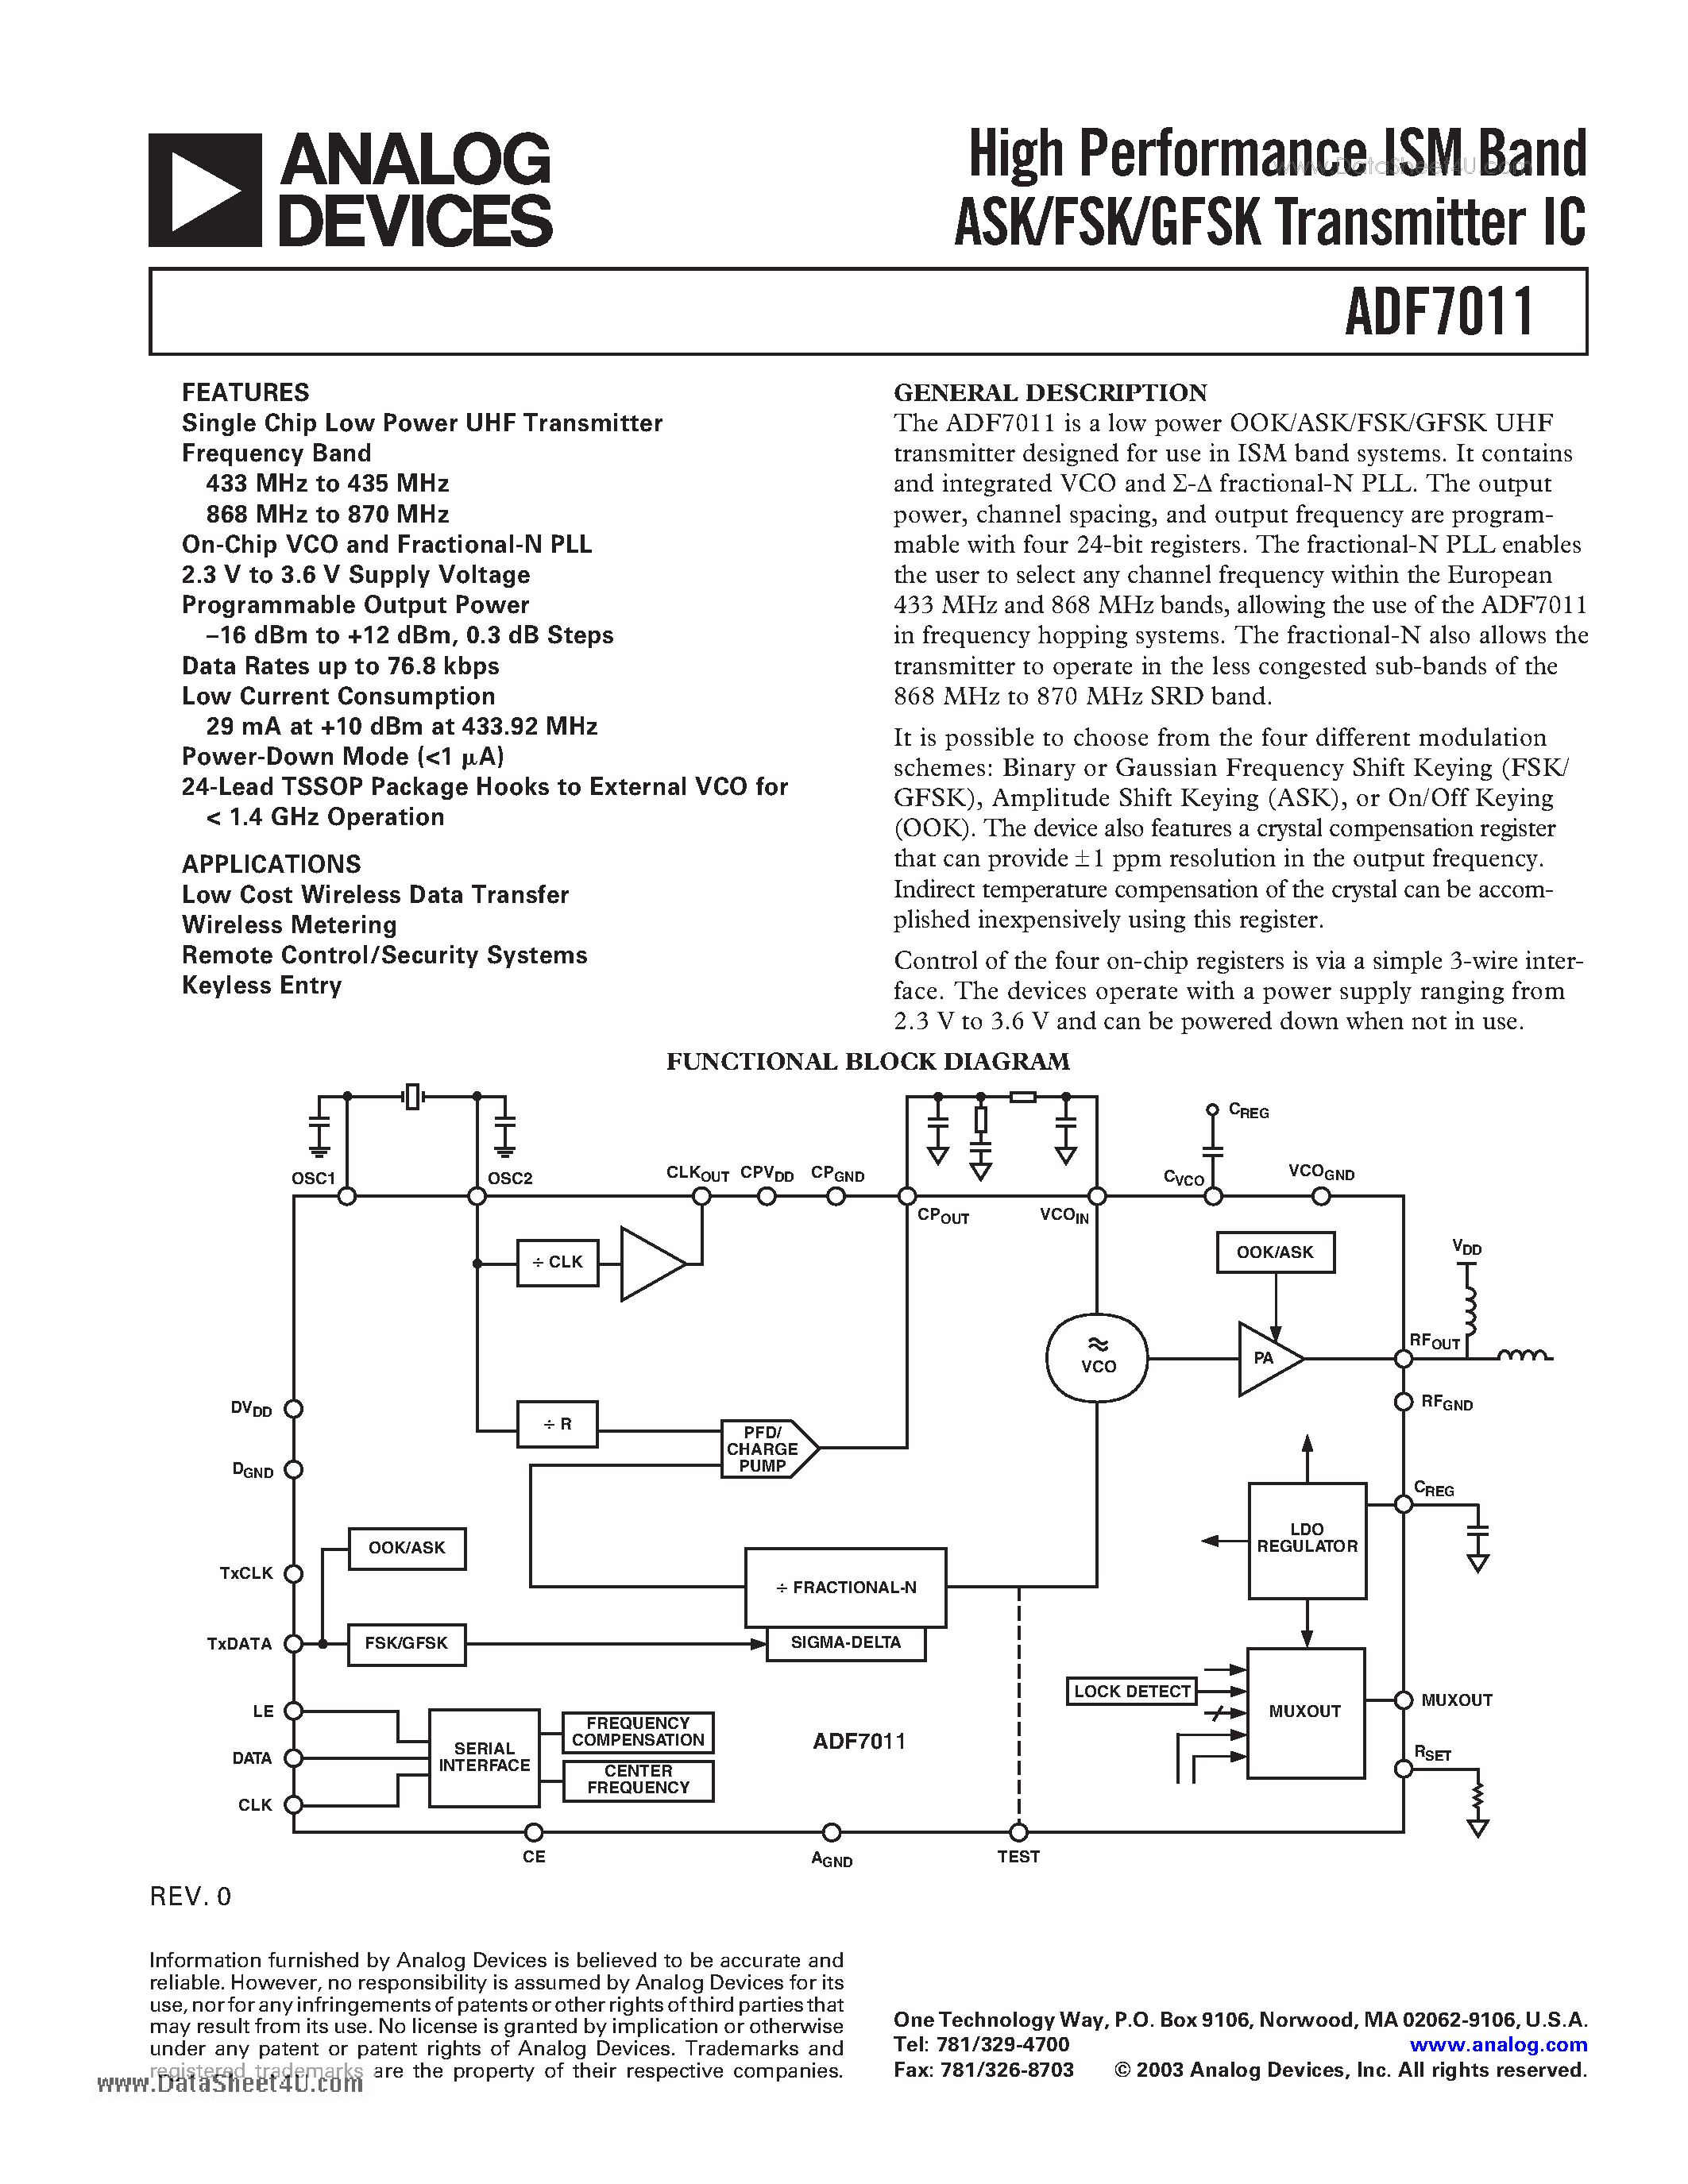 Datasheet ADF7011 - High Performance ISM Band ASK/FSK/GFSK Transmitter IC page 1